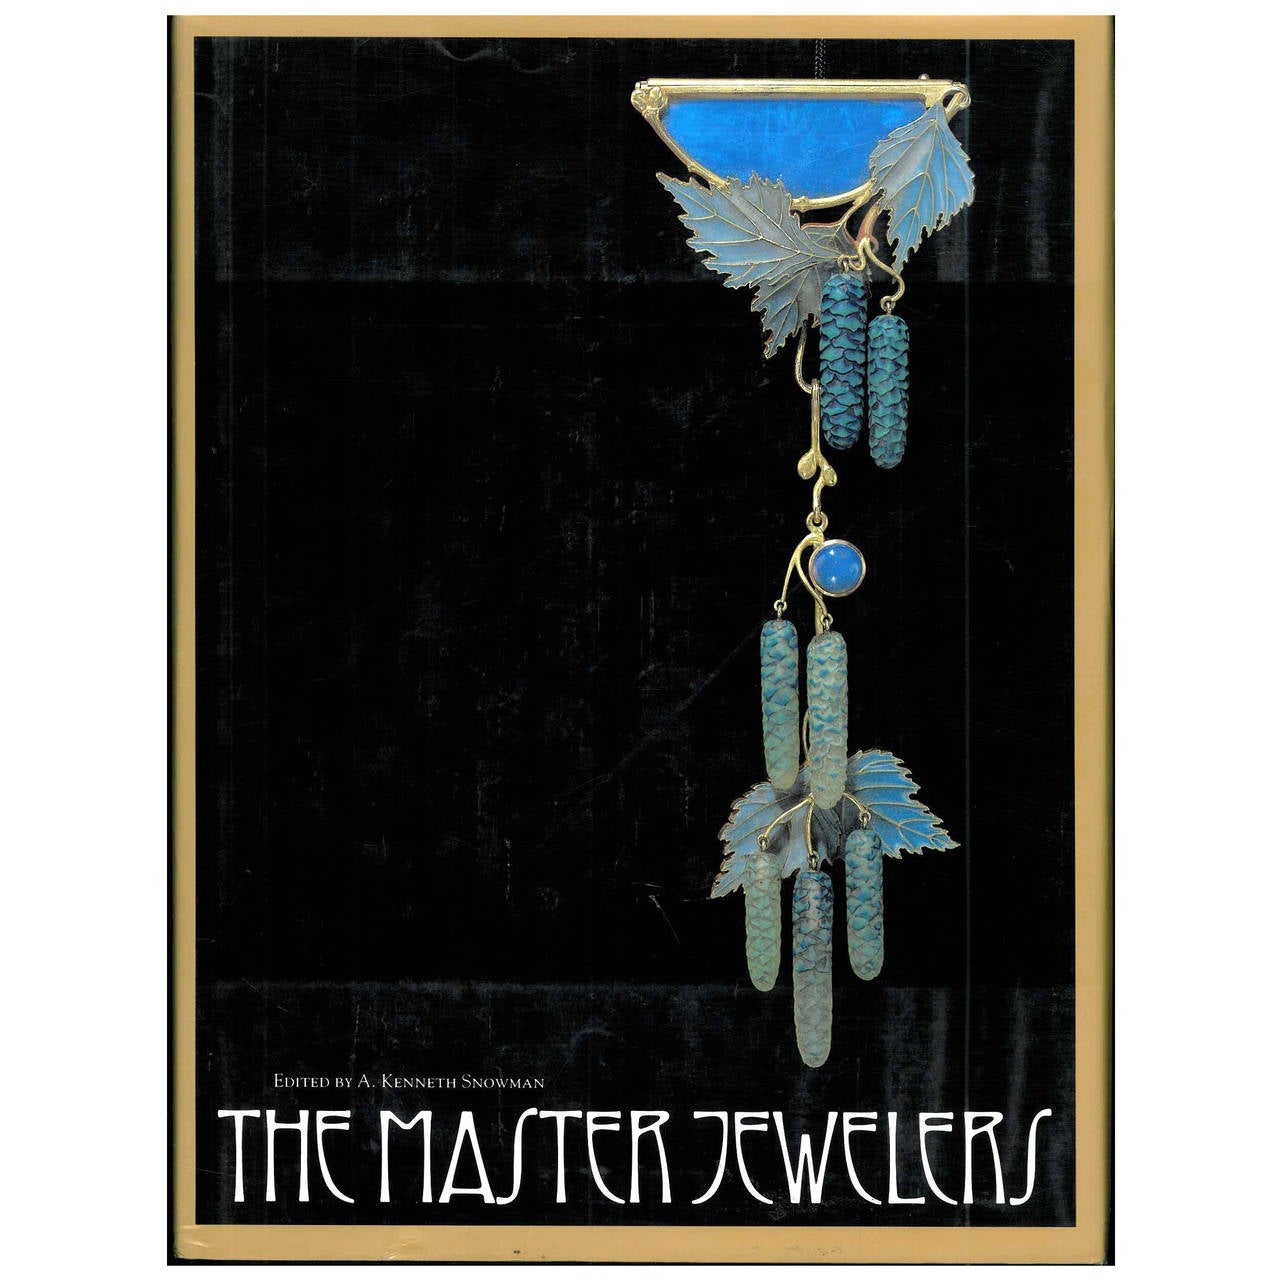 Book of The Master Jewelers